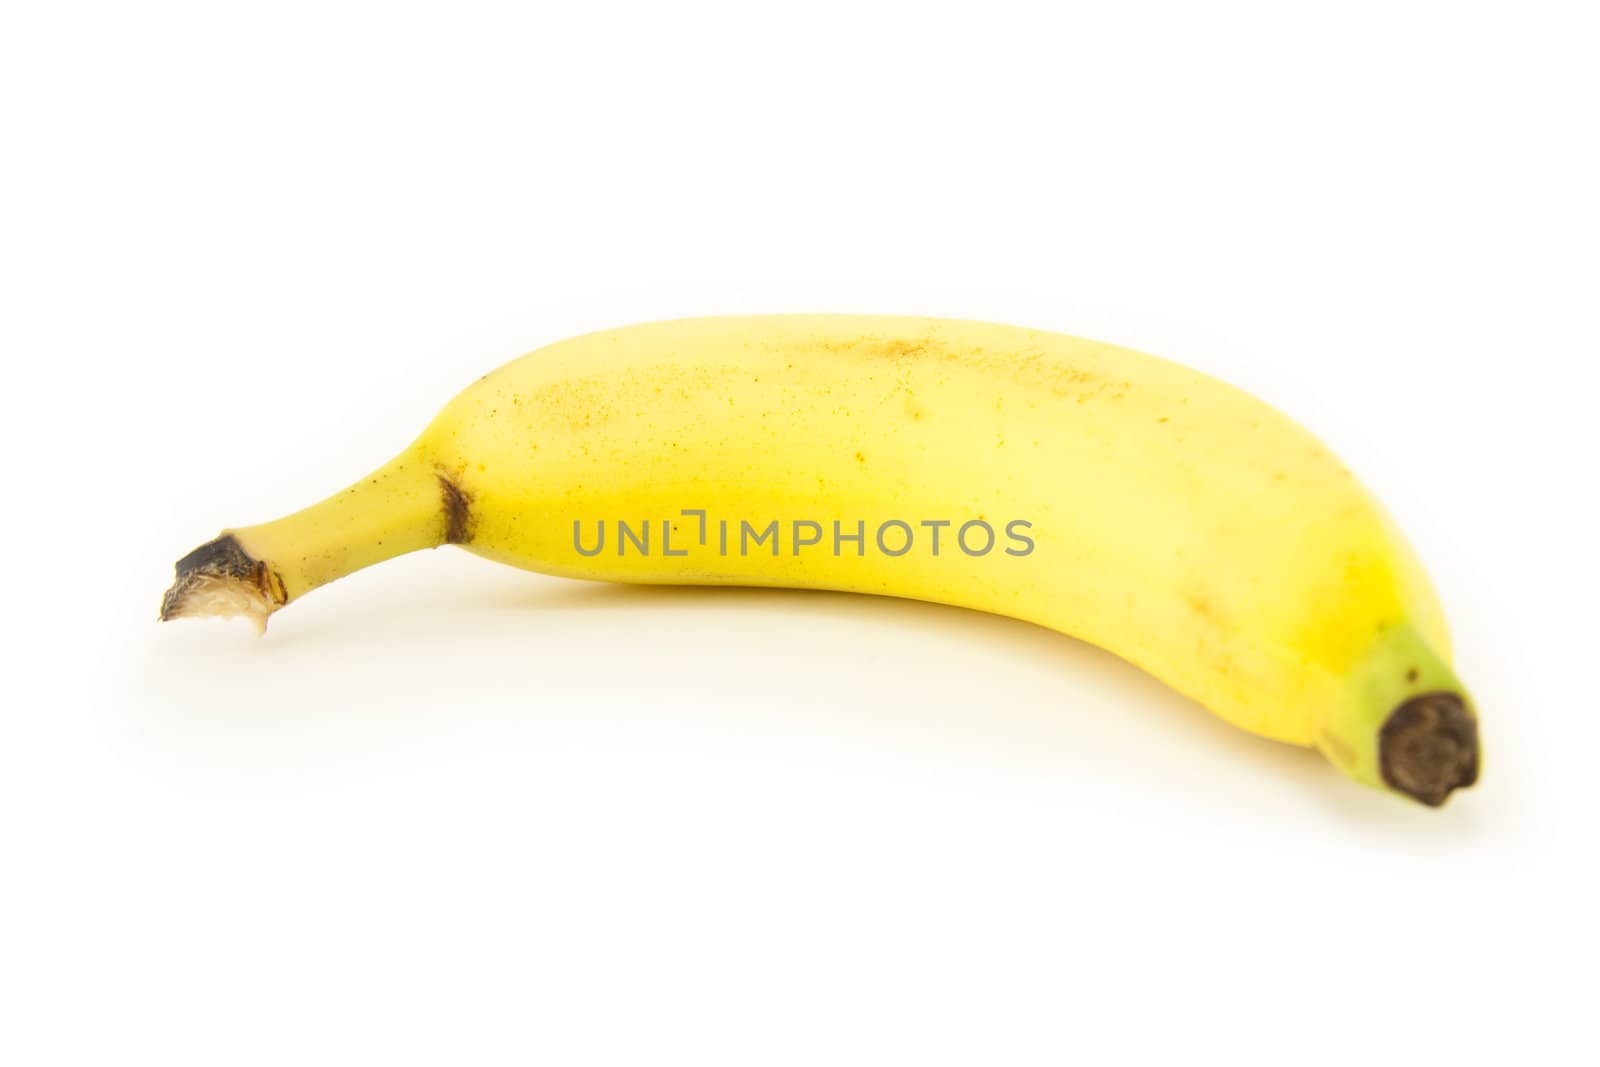 A single banana by ChrisAlleaume